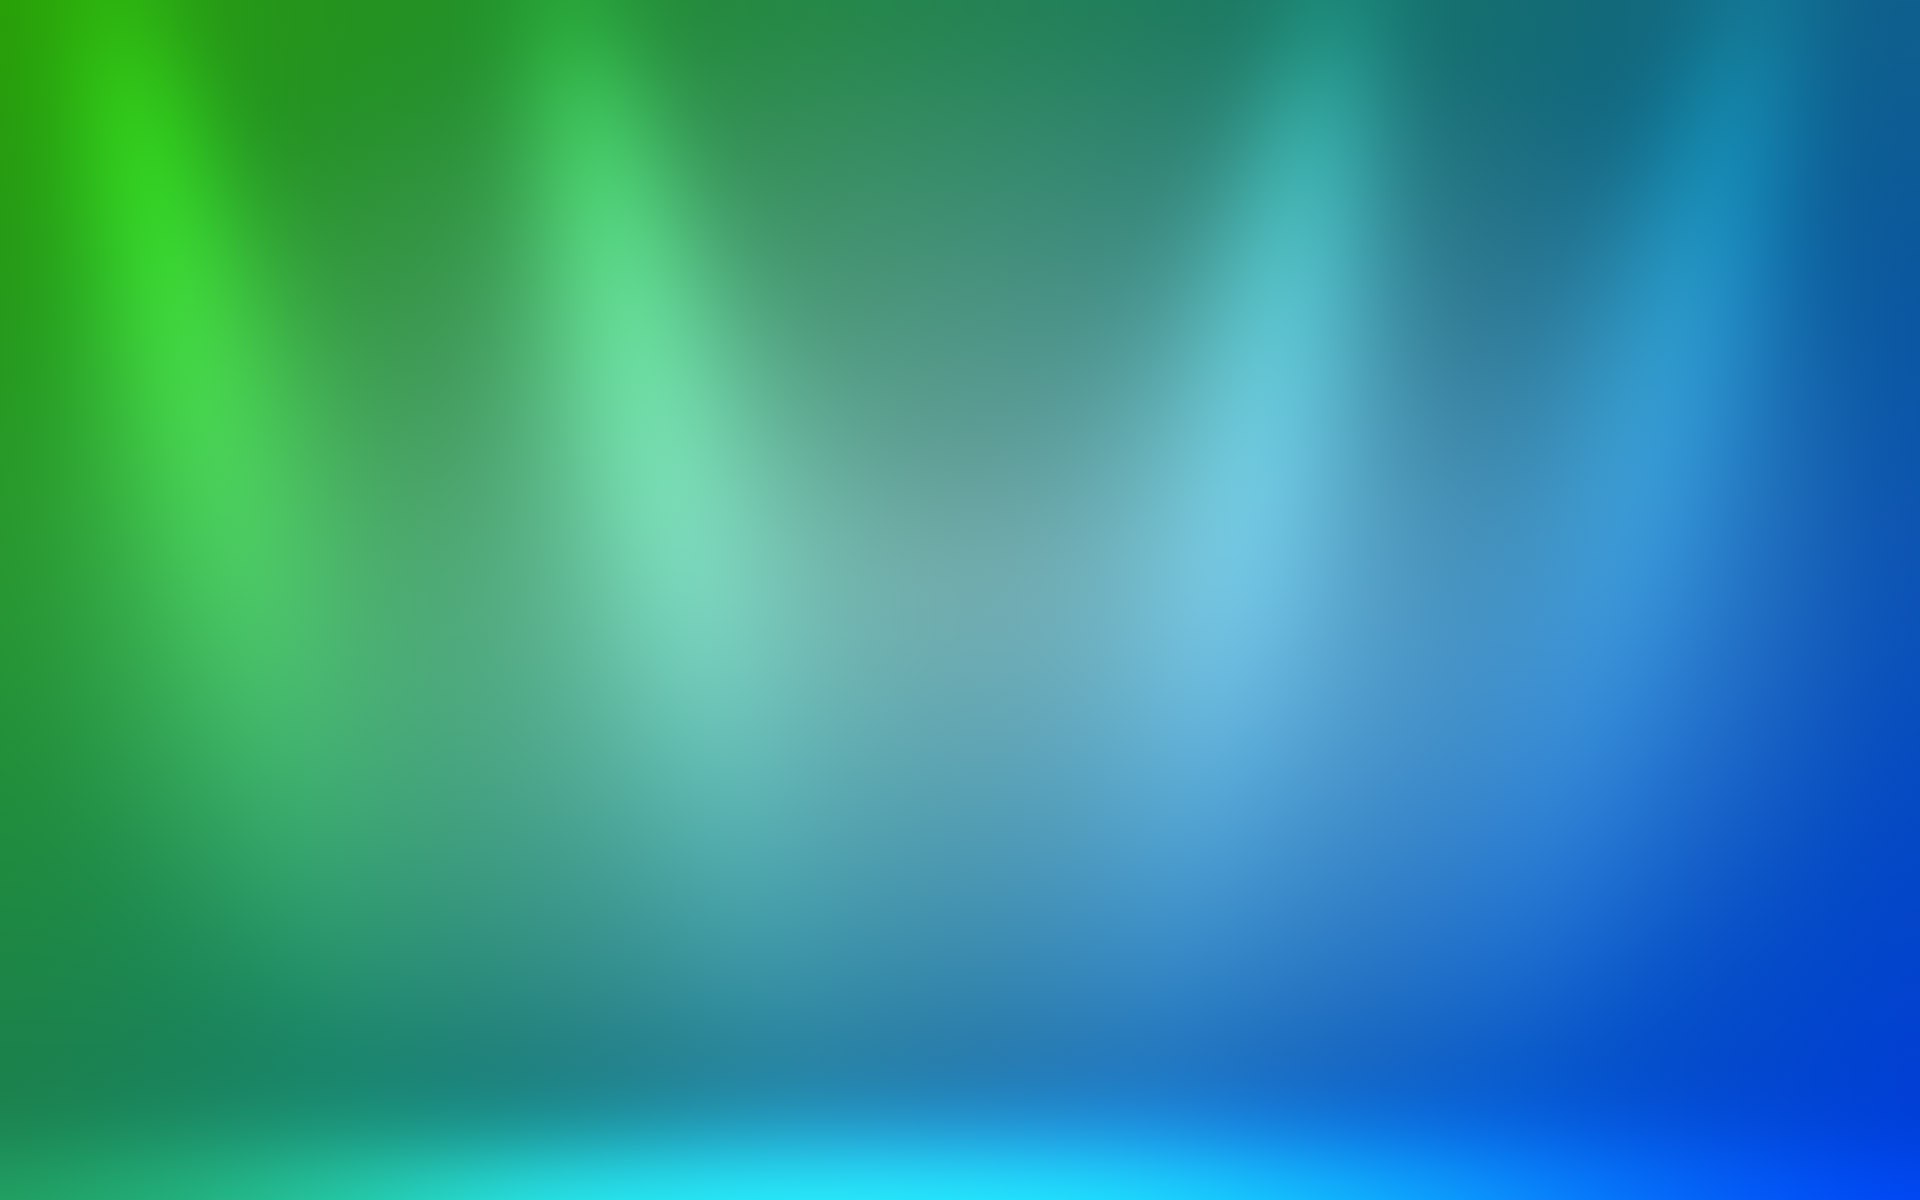 Neon Green And Blue Backgrounds